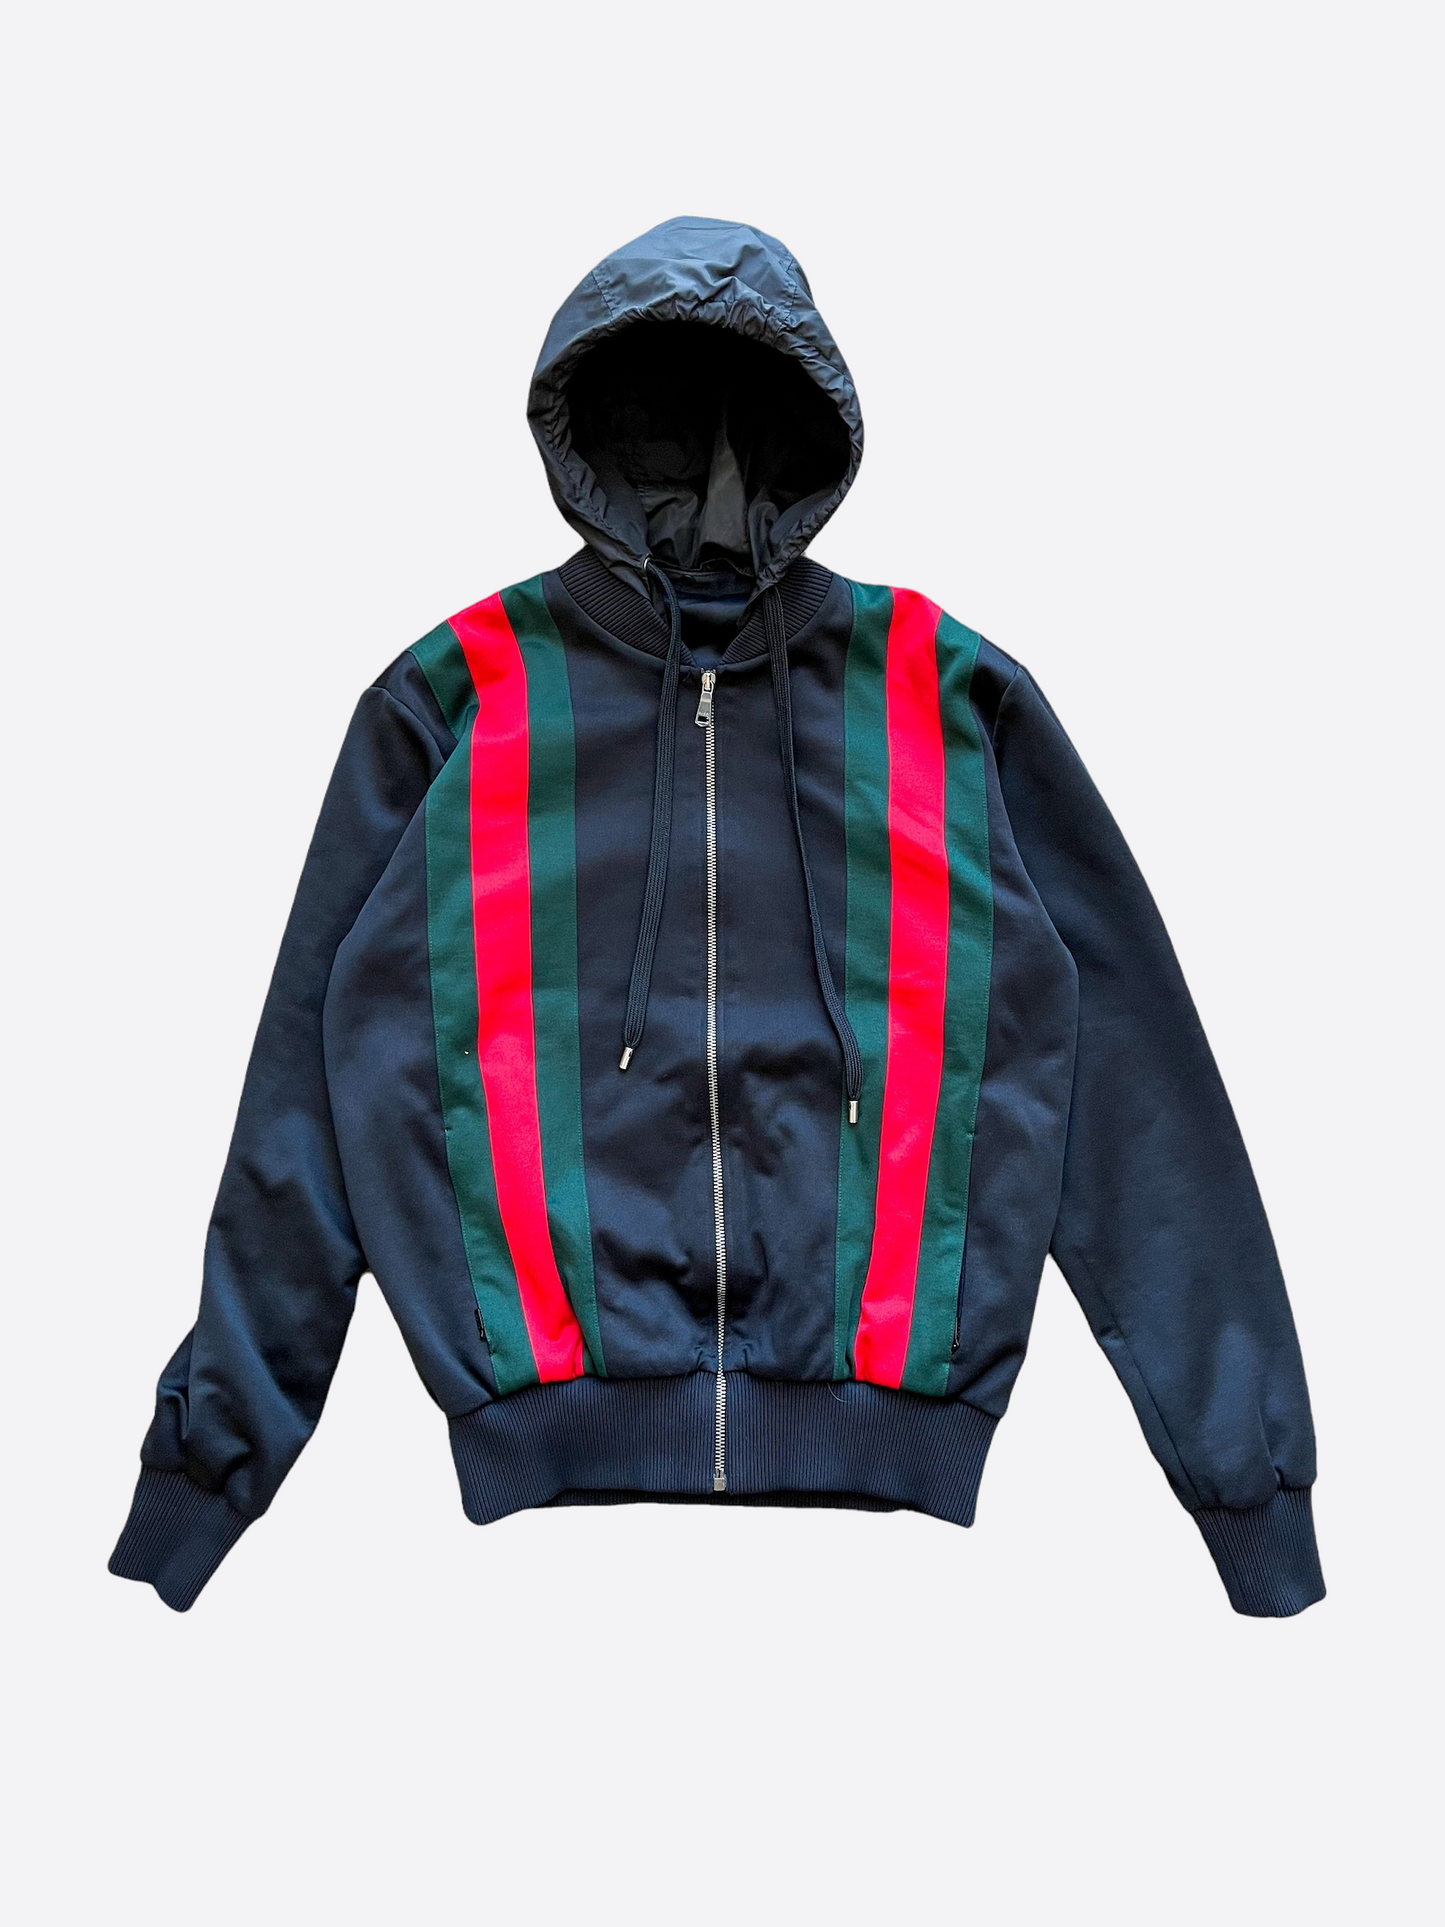 Gucci Striped Hooded Bomber Jacket